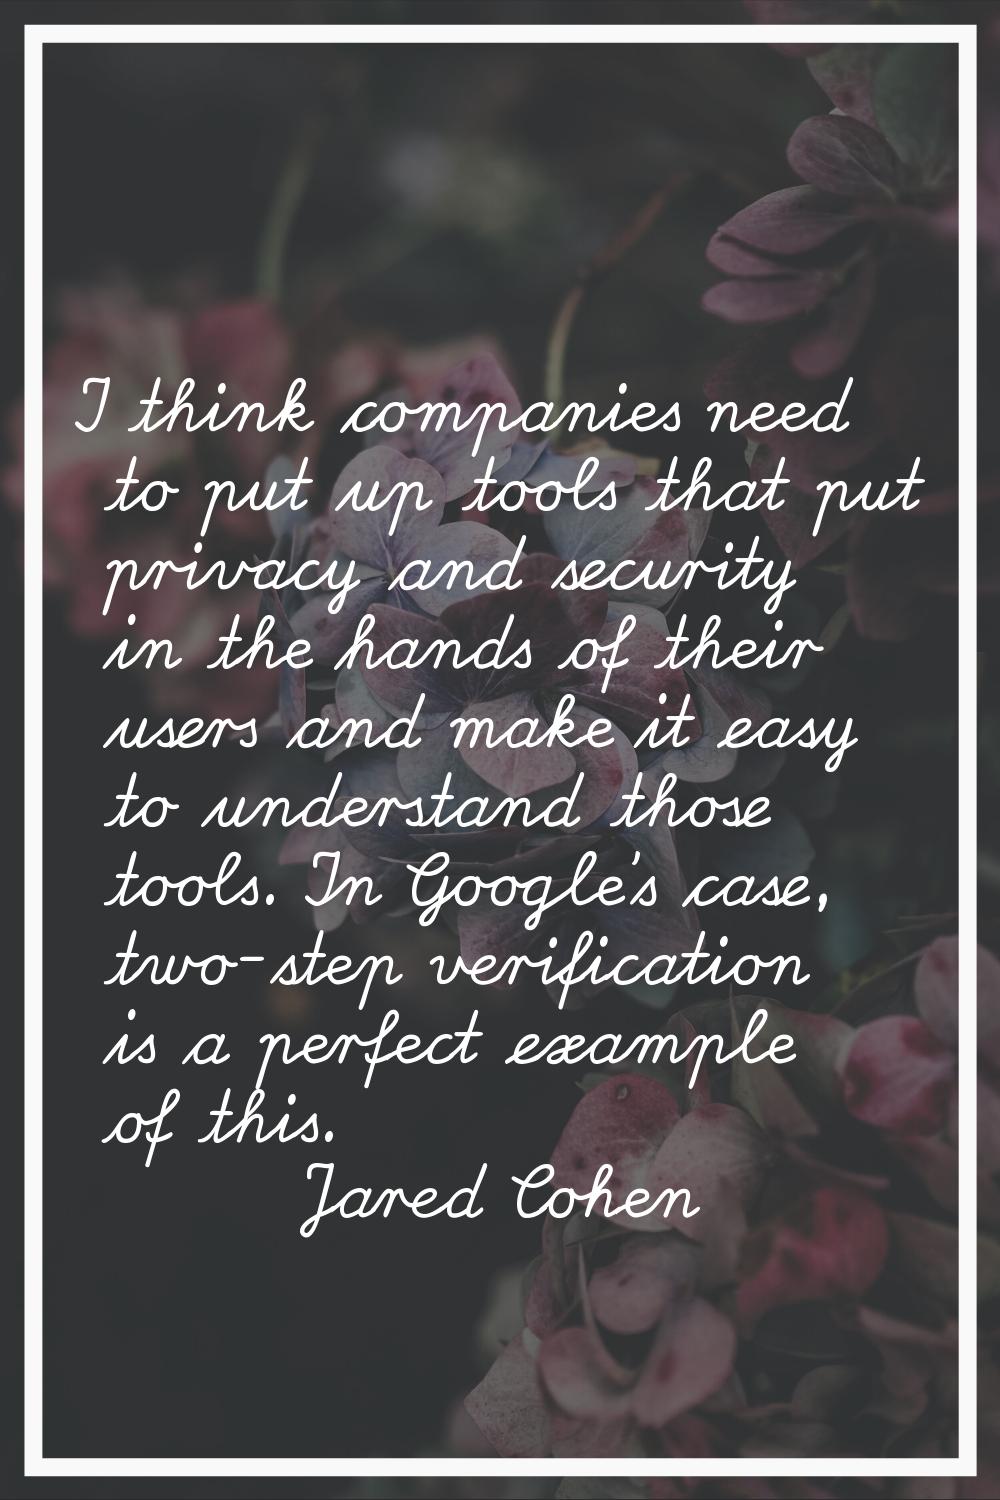 I think companies need to put up tools that put privacy and security in the hands of their users an